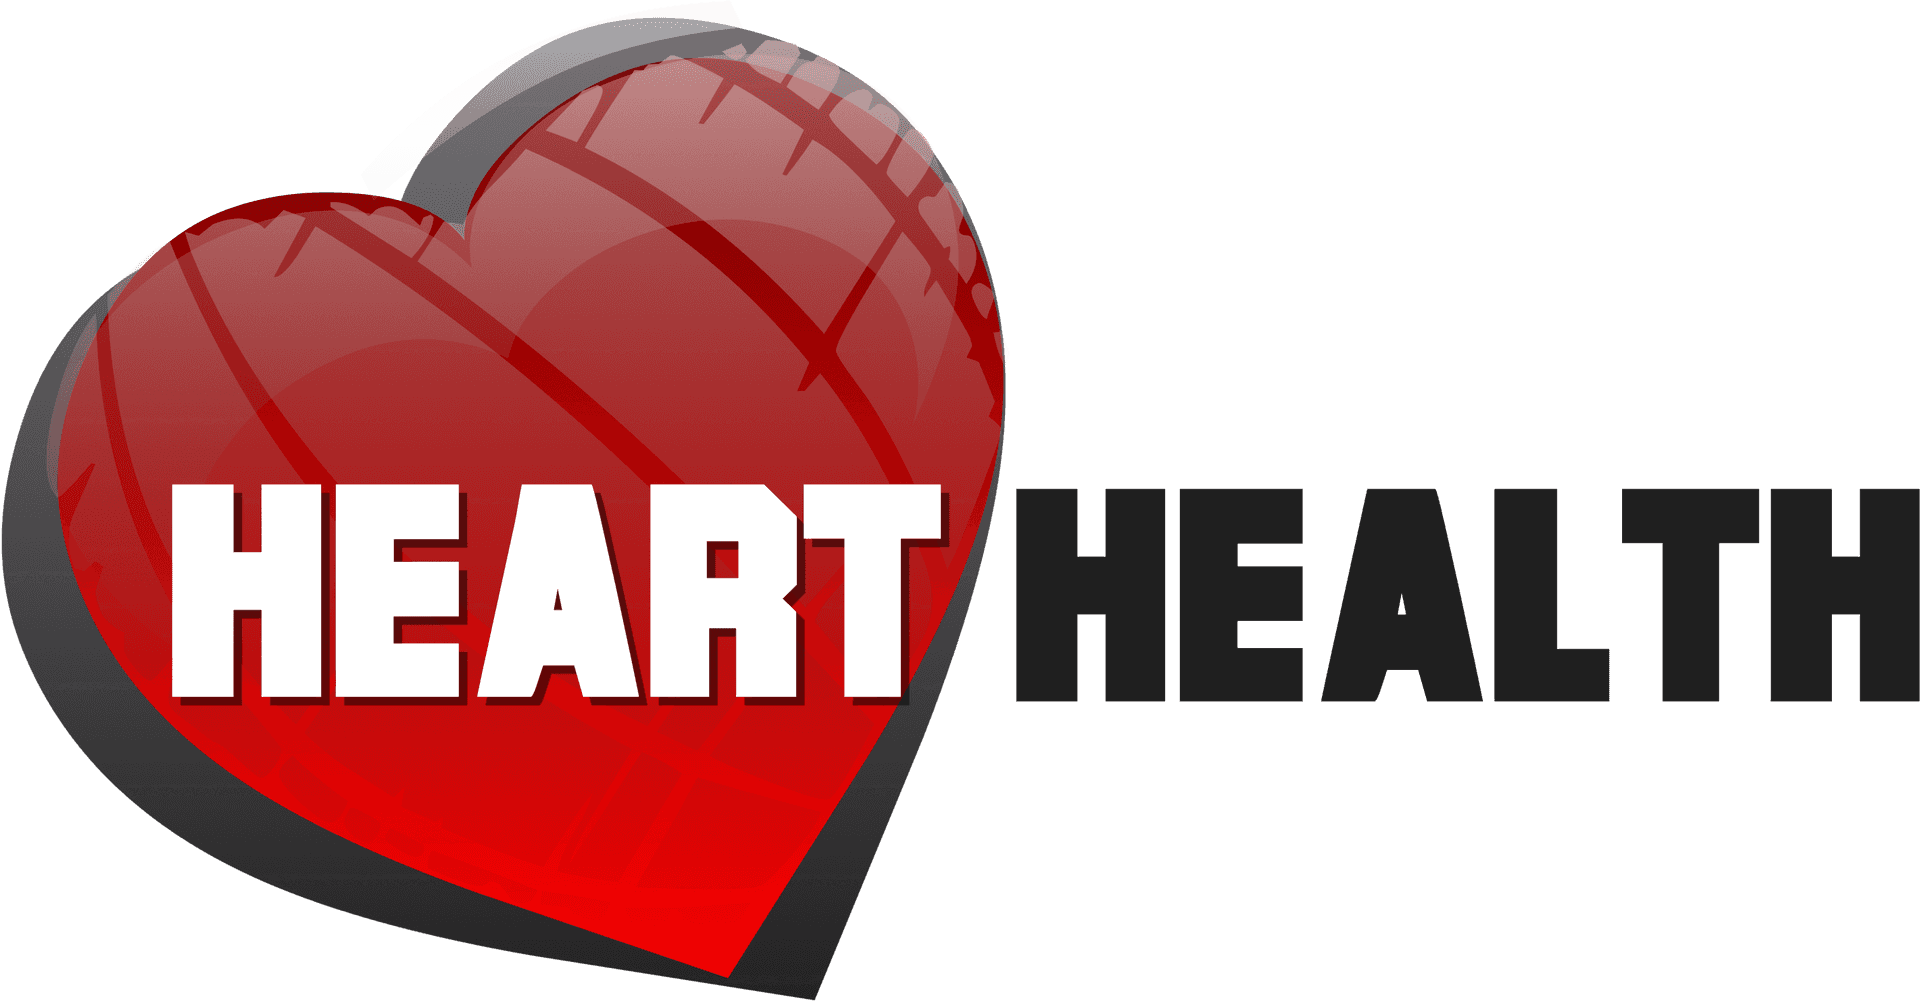 Heart Health Concept PNG image